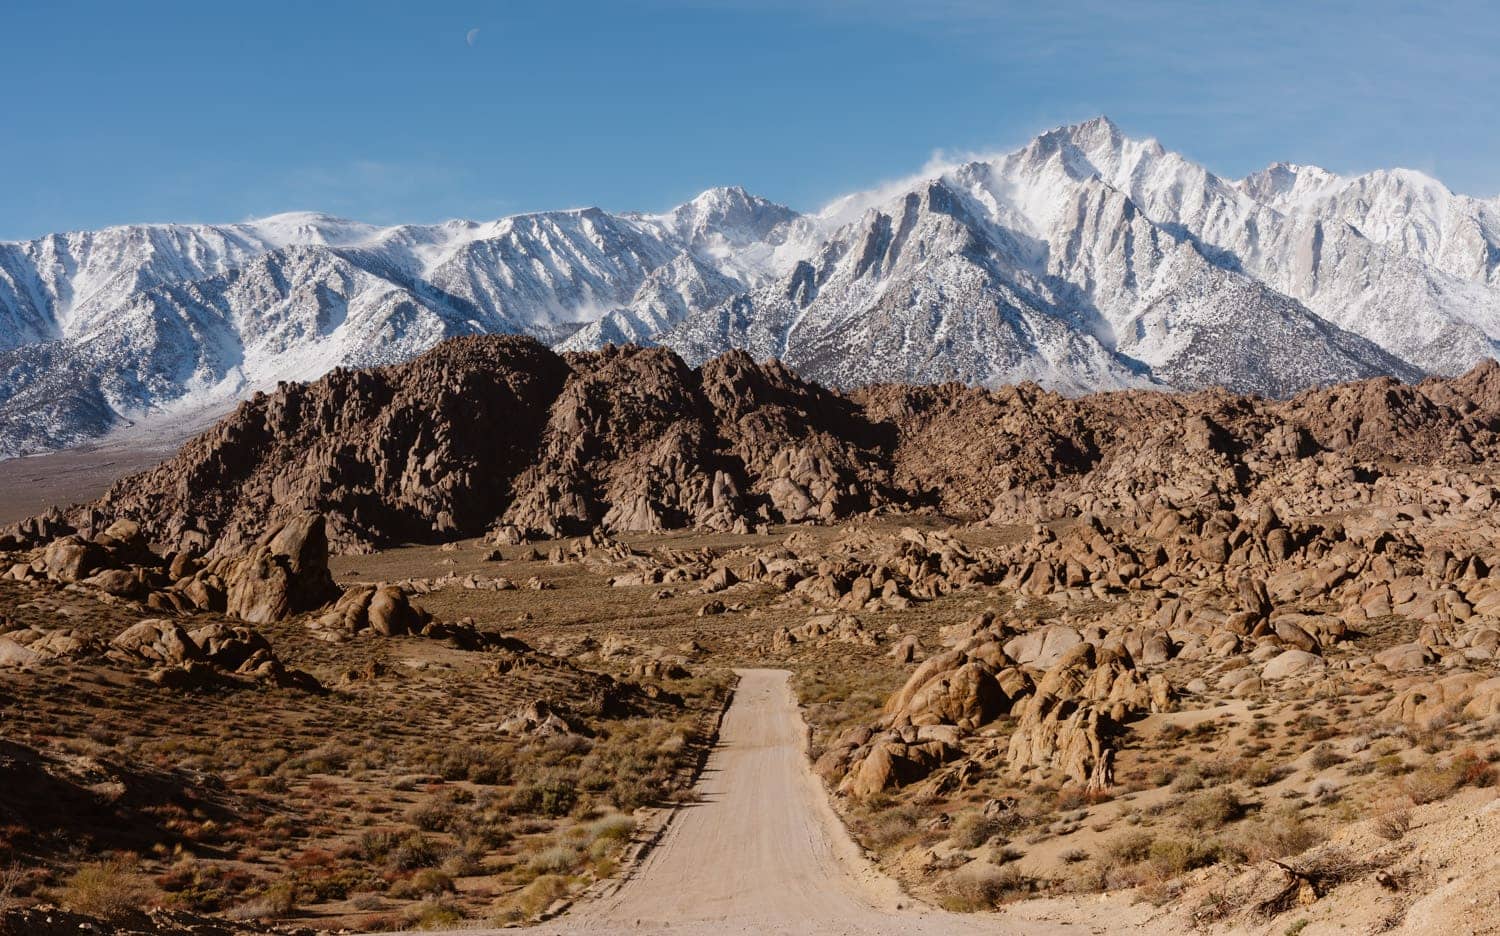 A dirt Movie Road meanders through Alabama Hills, leading towards the snow-covered peaks of a mountain range under a clear blue sky with a crescent moon visible above.